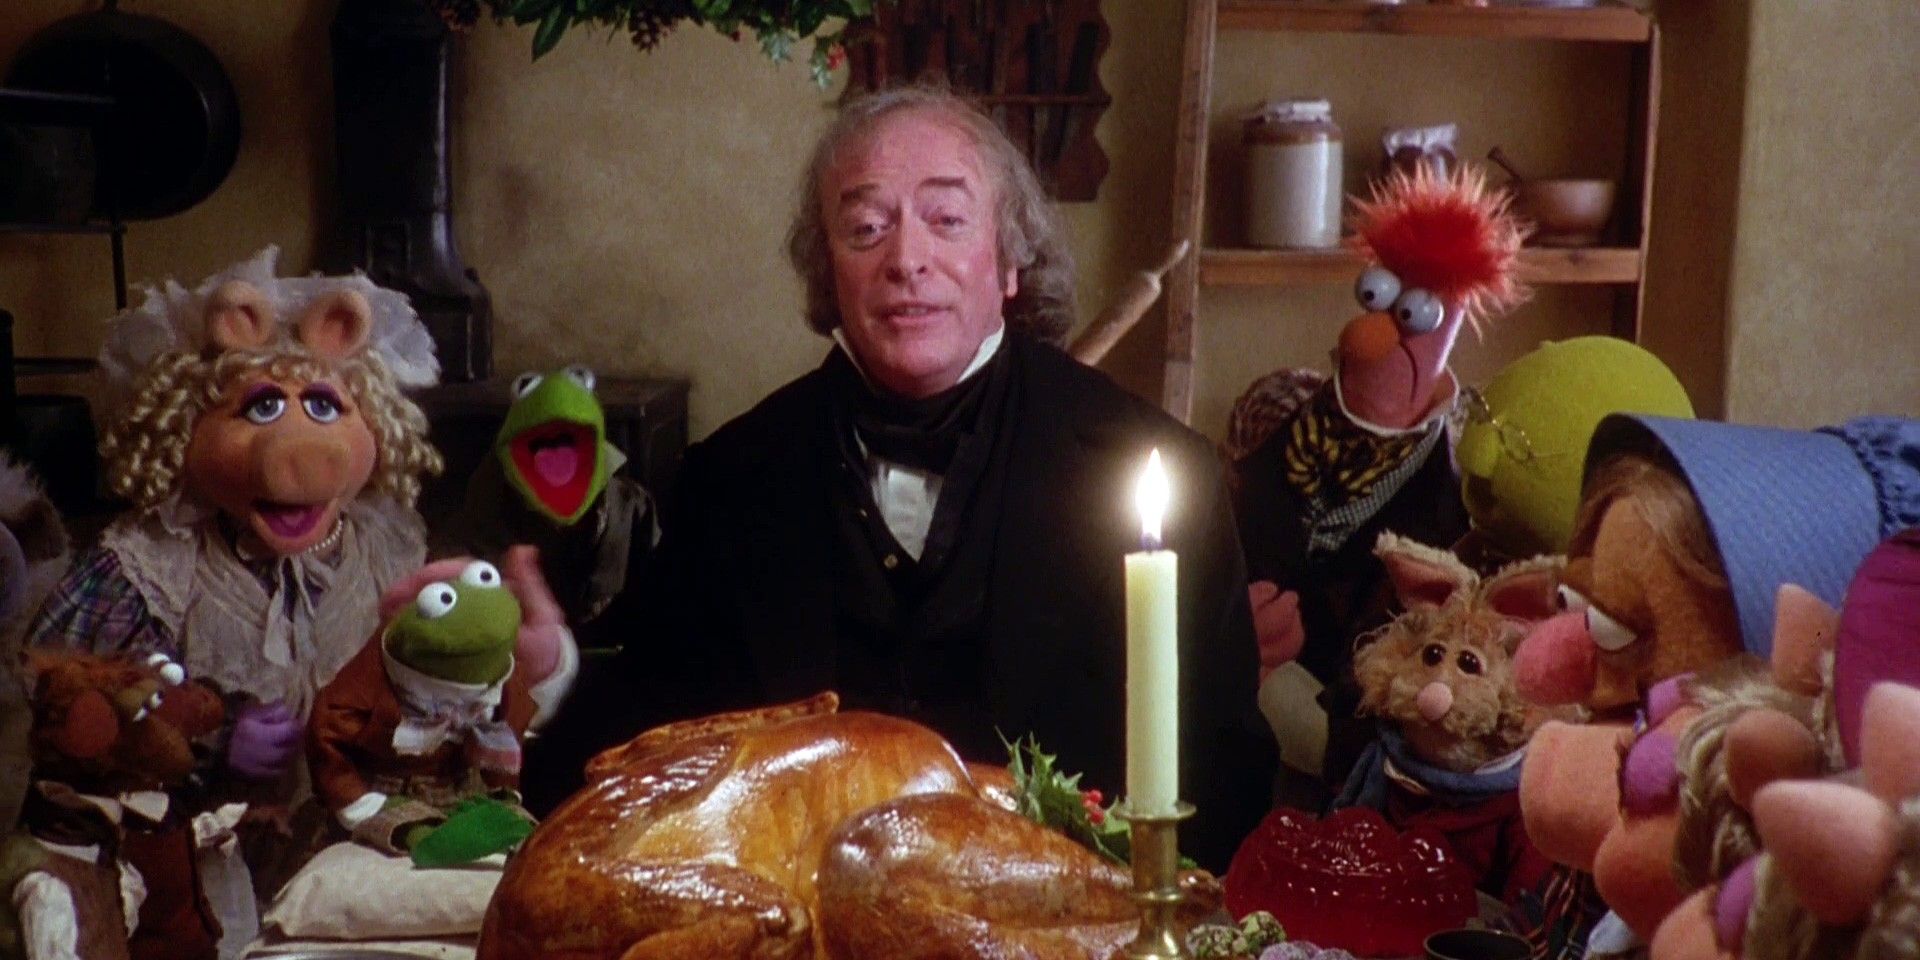 Ebenezer Scrooge and the Muppets in The Muppet Christmas Carol.